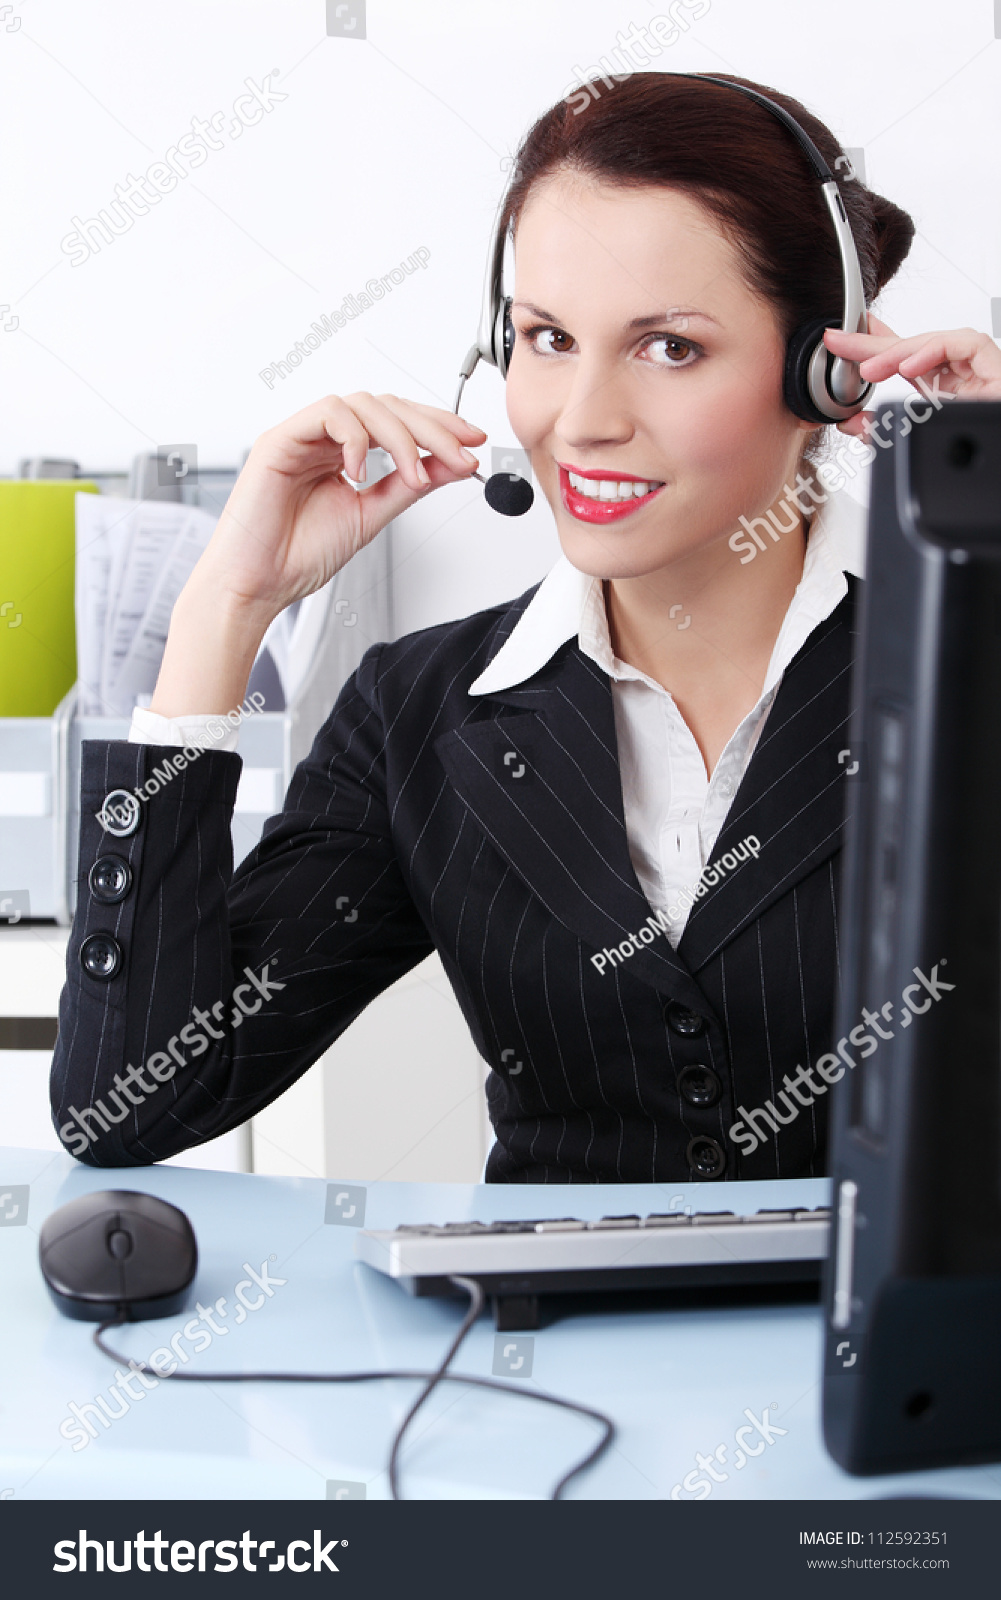 Young Smiling Operator Isolated Over White Stock Photo 112592351 ...